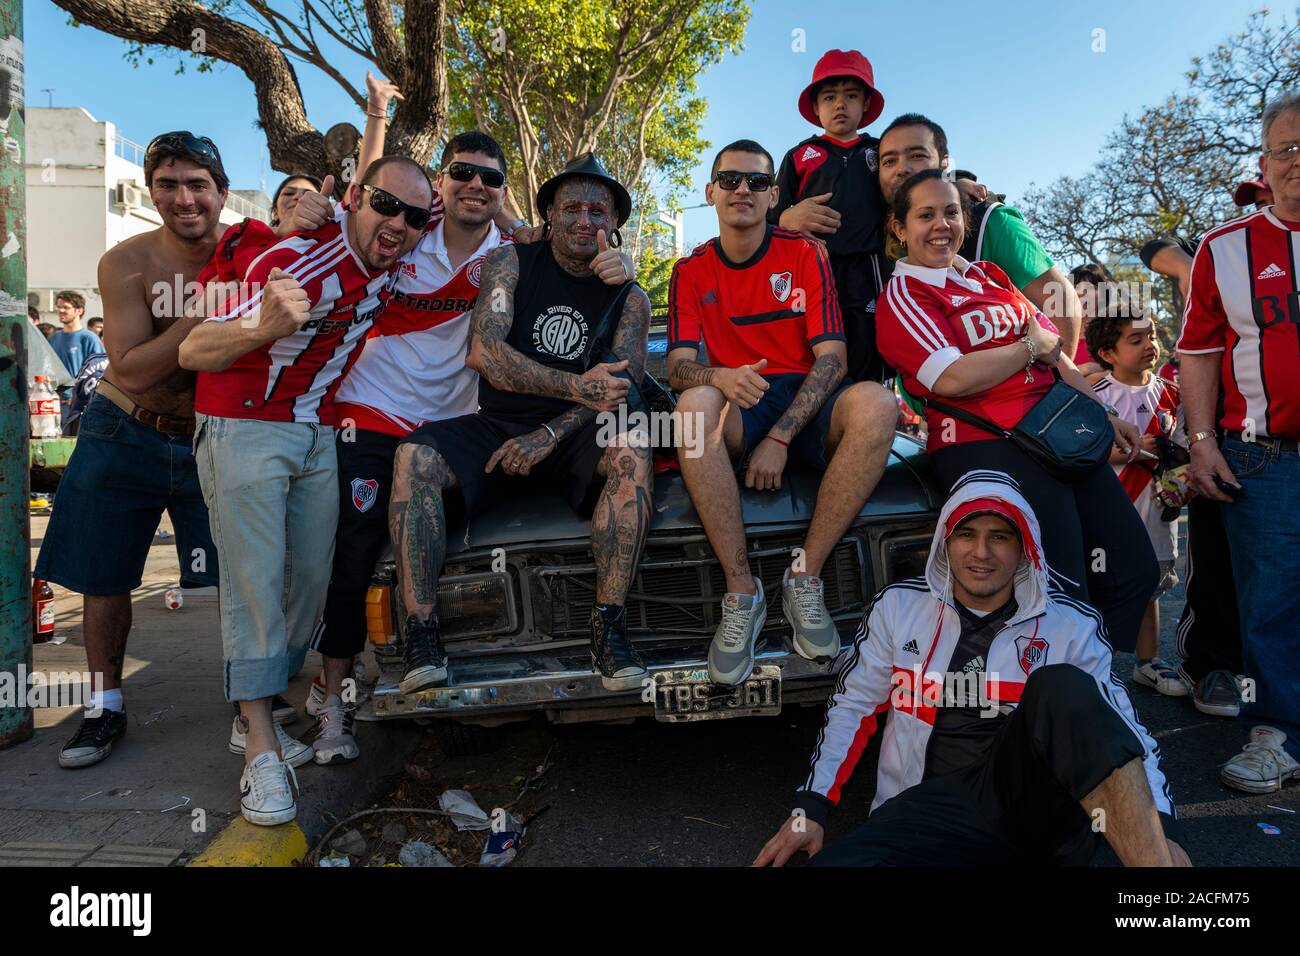 Buenos Aires, Argentina - October 6, 2013: River Plate supporters arriving at the Estadio Monumental Antonio Vespucio Liberti for a soccer game in the Stock Photo